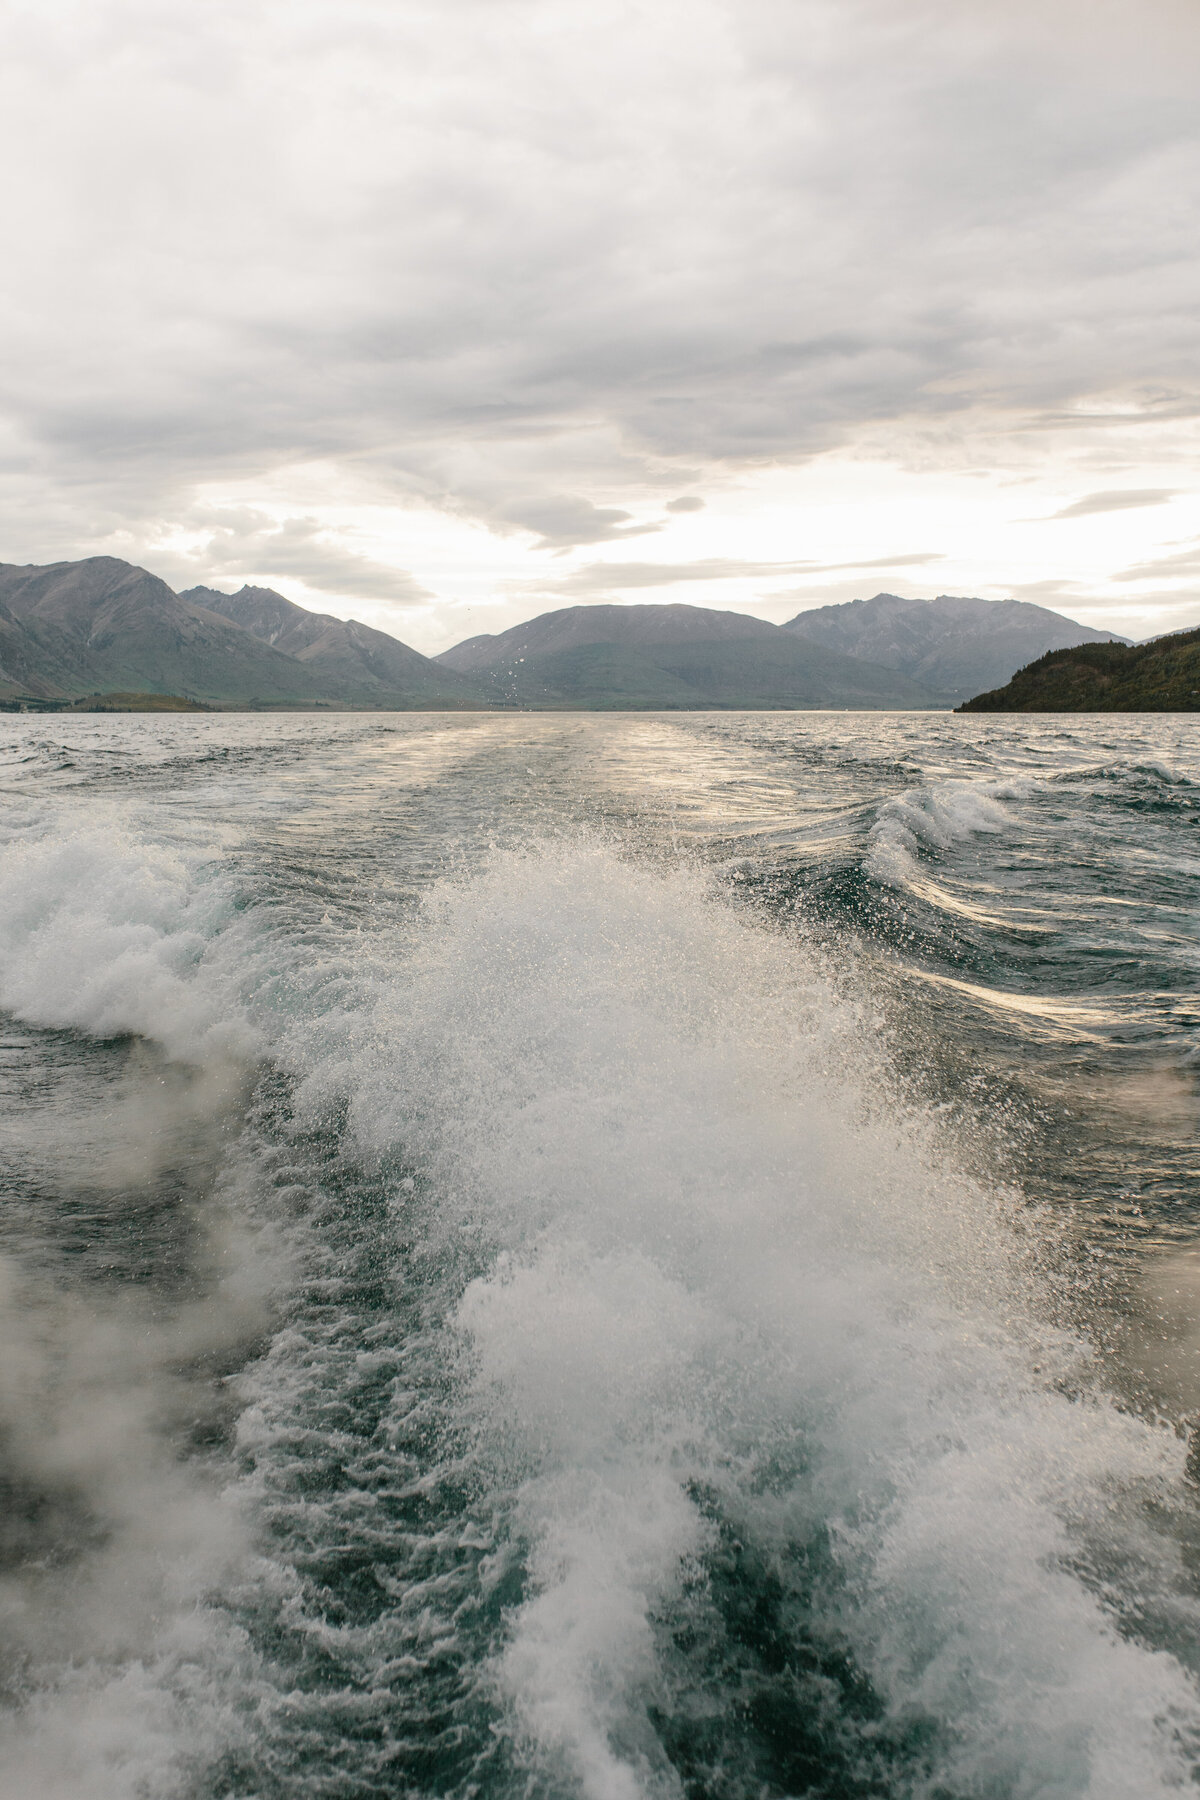 The Lovers Elopement Co - wake of boat looking towards mountains on Queenstown lake Wakatipu